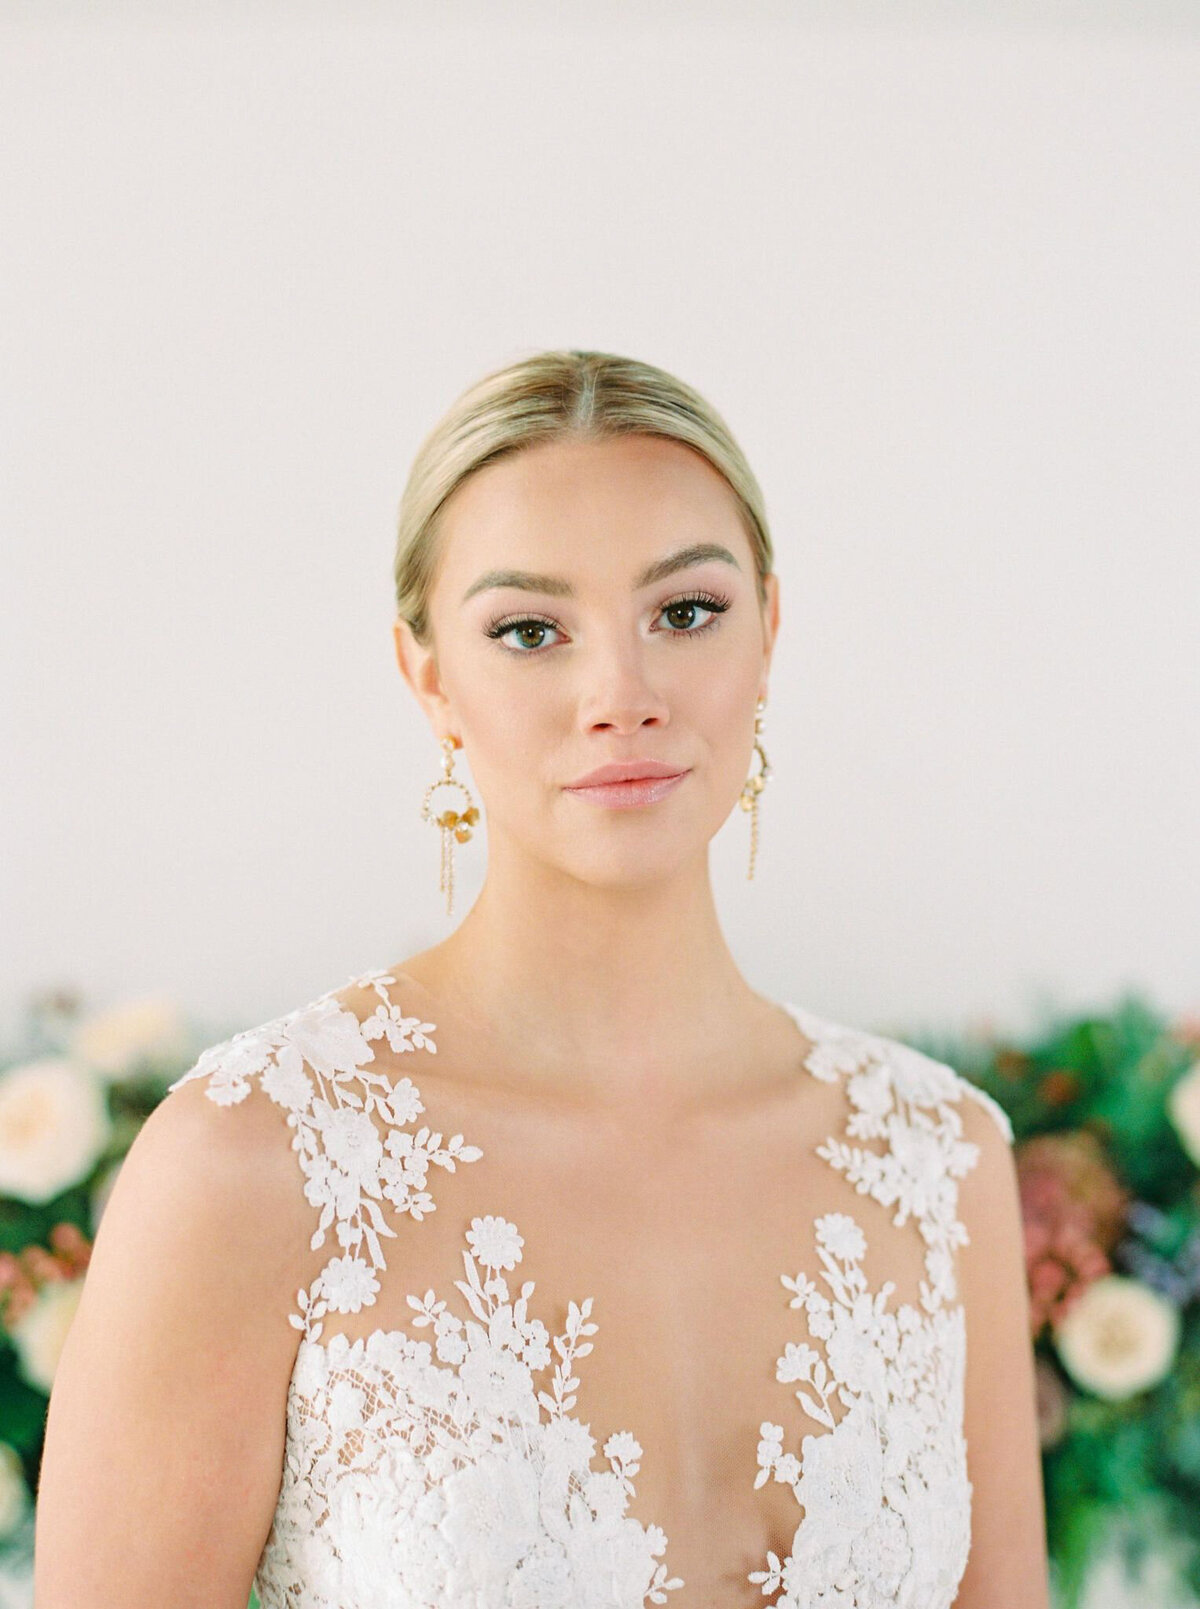 Simple and elegant bridal hair and makeup by Madi Leigh Artistry, experienced and inclusive Calgary hair & makeup artist, featured on the Brontë Bride Vendor Guide.